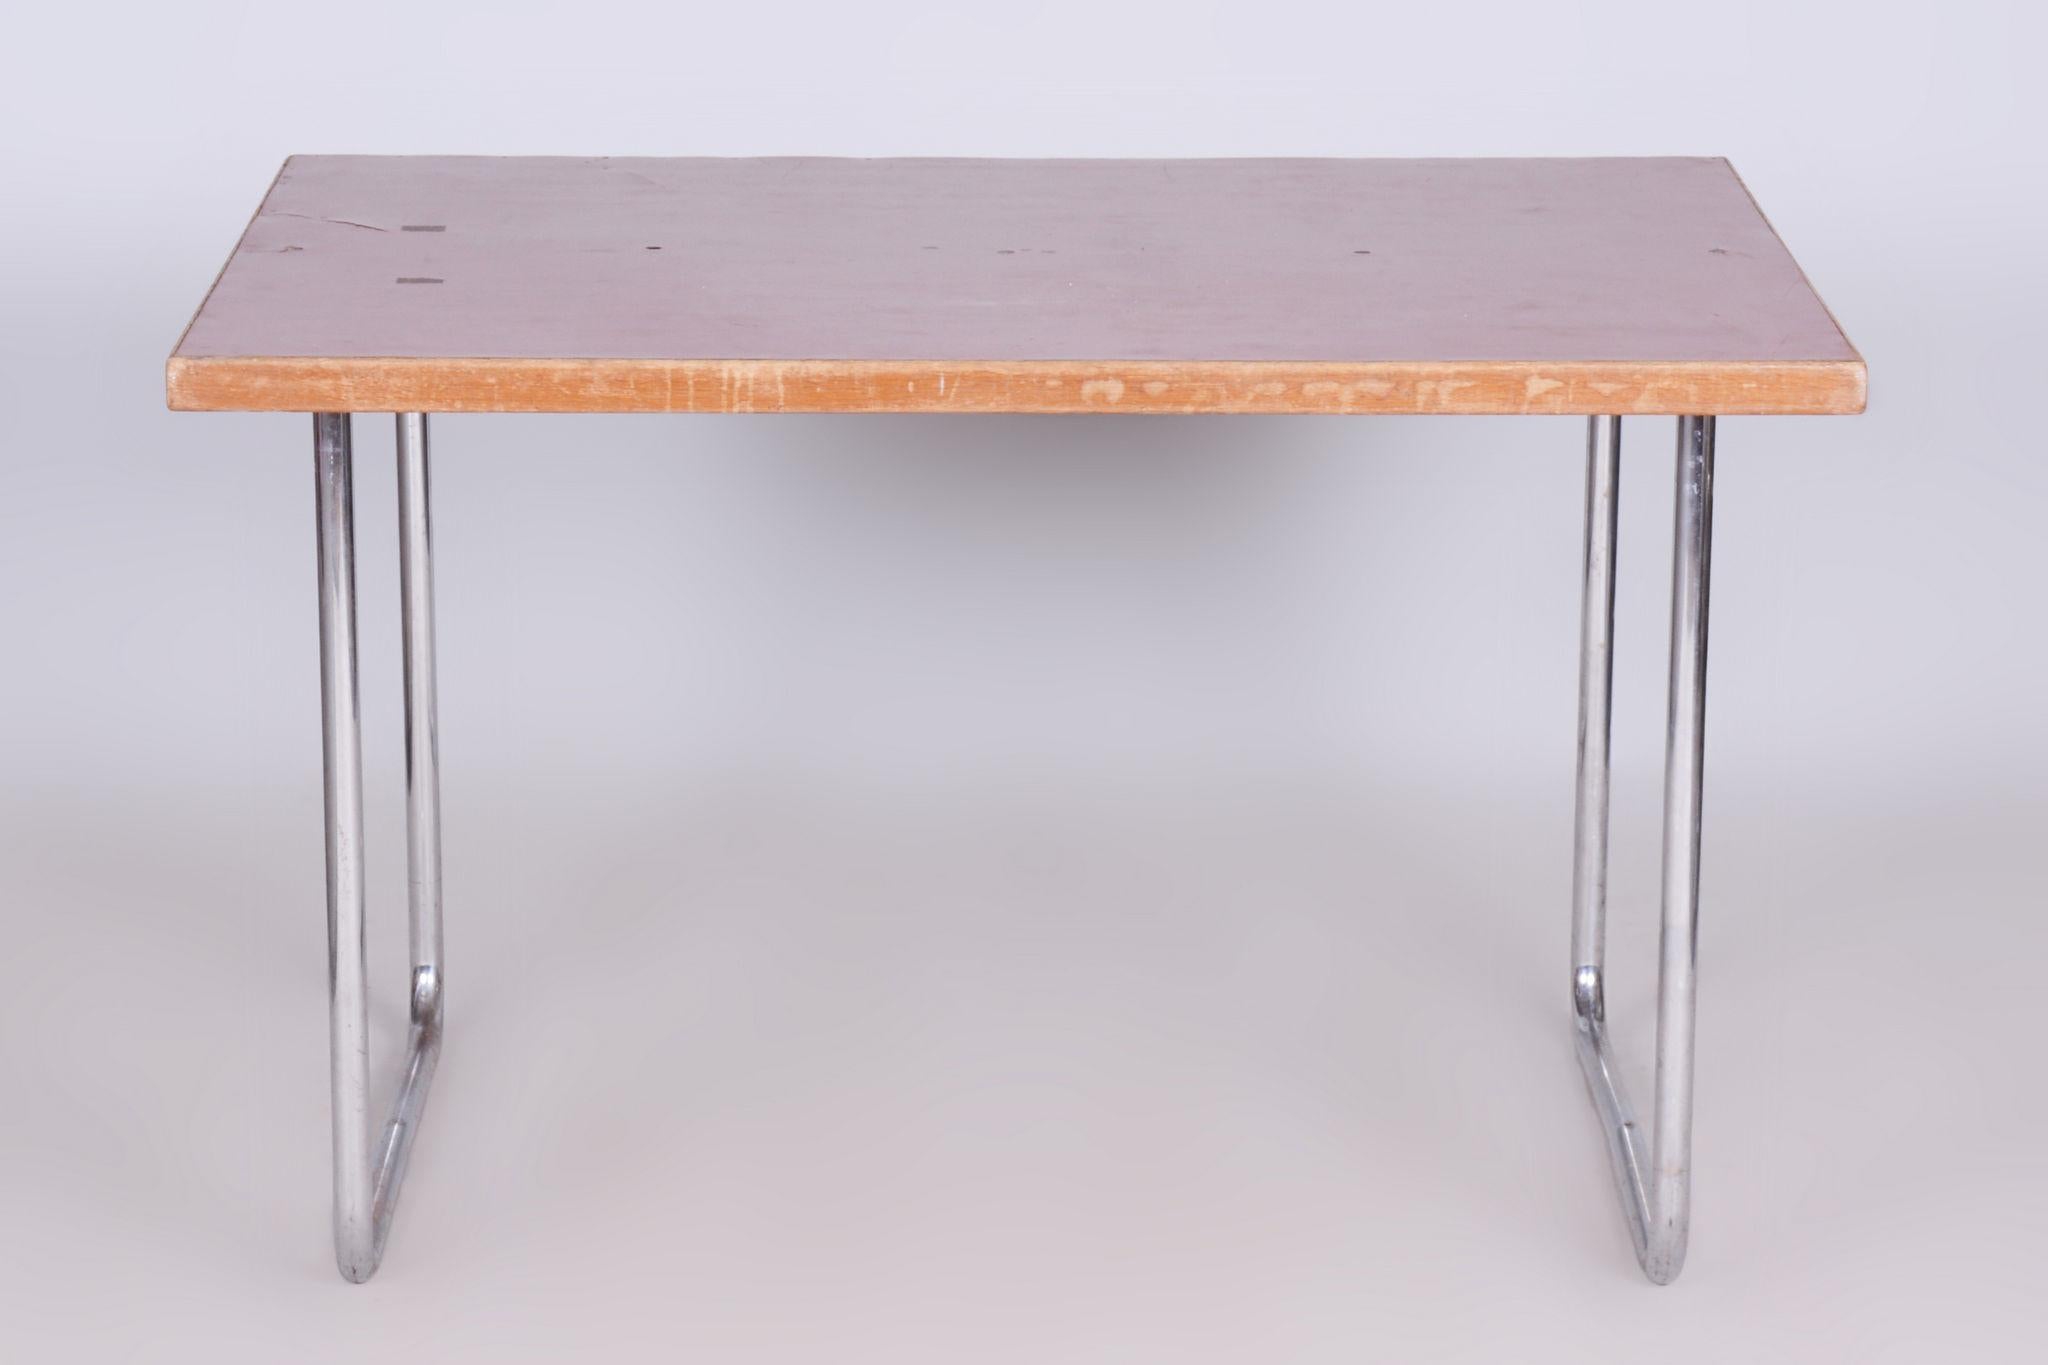 Original Bauhaus dining table.

Period: 1930-1939
Source: Czechia
Material: Chrome-Plated Steel, Spruce wood, Marmoleum 

Original well preserved condition.

In pristine original condition, the item has been professionally cleaned, and its polish